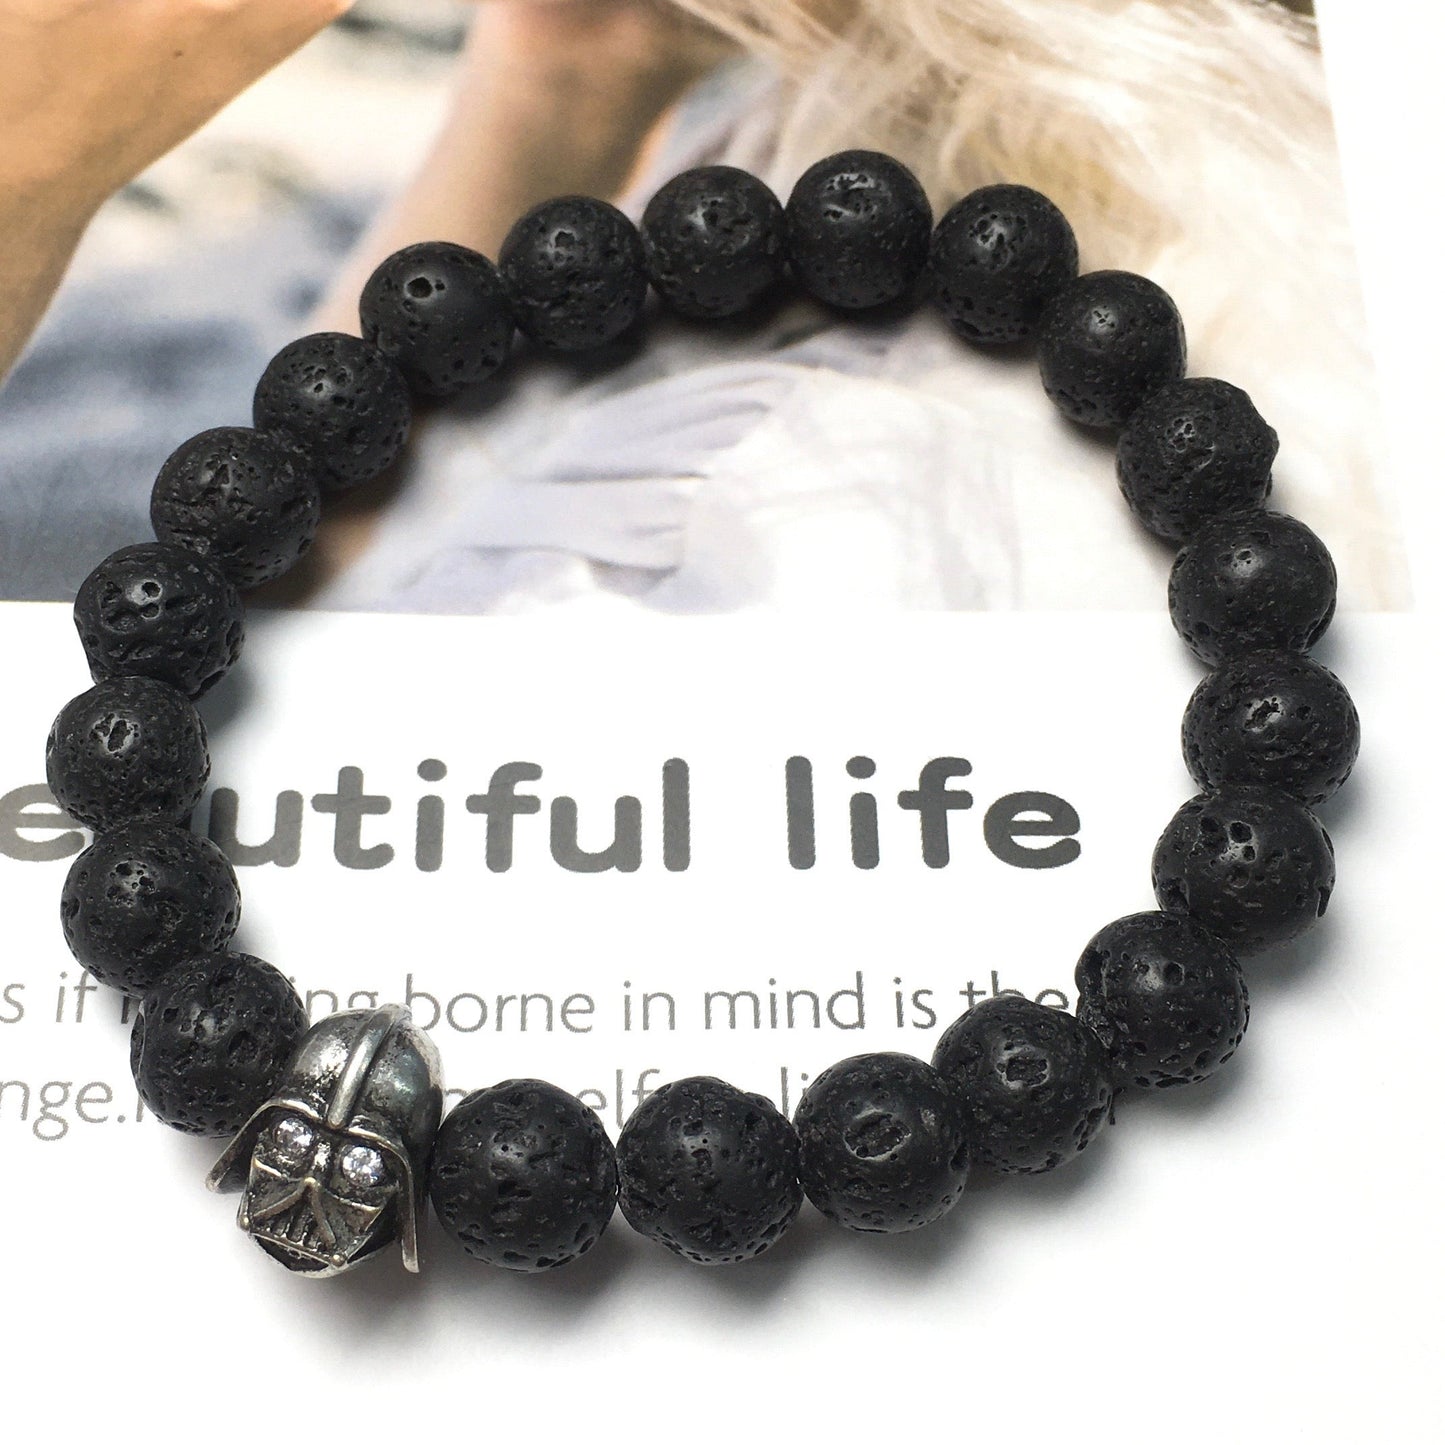 Lava Beads Gemstone with Imperial Darth Vader Charms Jewellery Elastic Handmade Bracelets